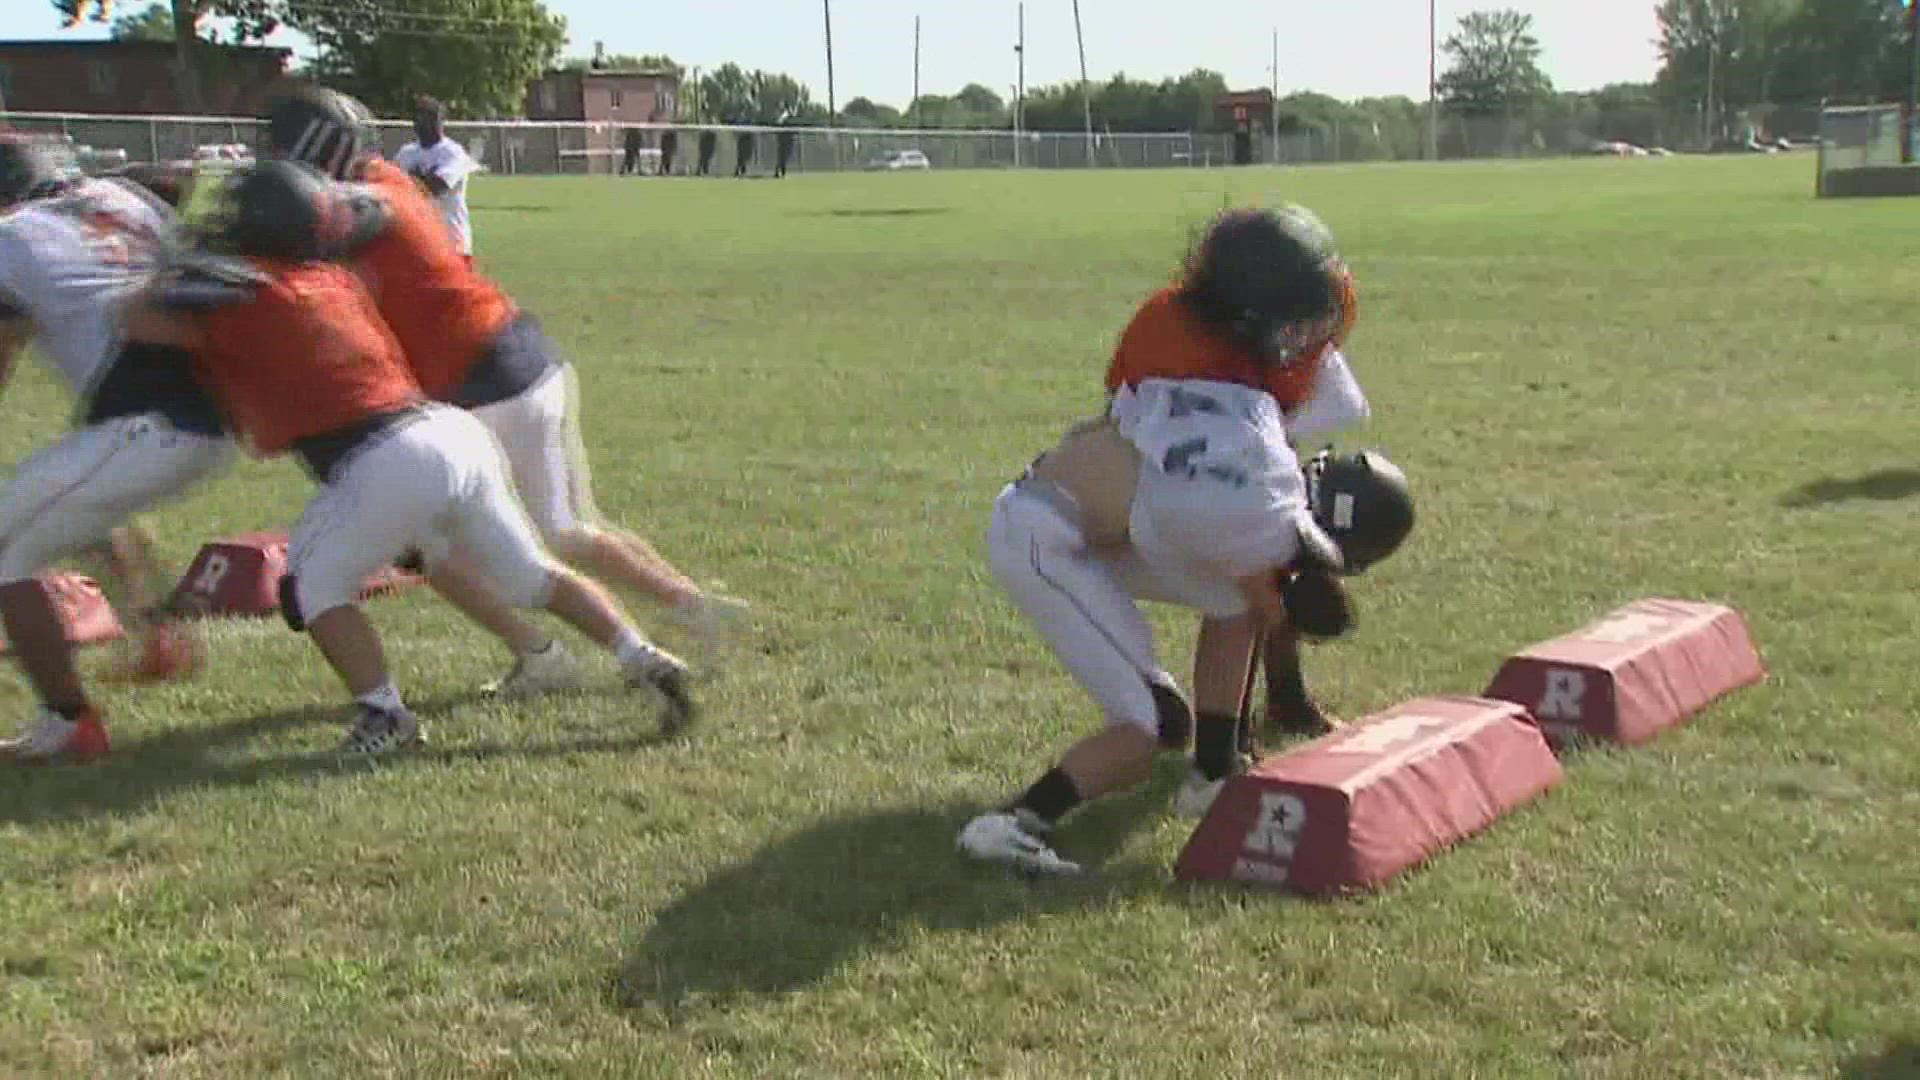 Kewanee is ready for the upcoming football season. They will be looking to make the playoffs with an experienced group of players.